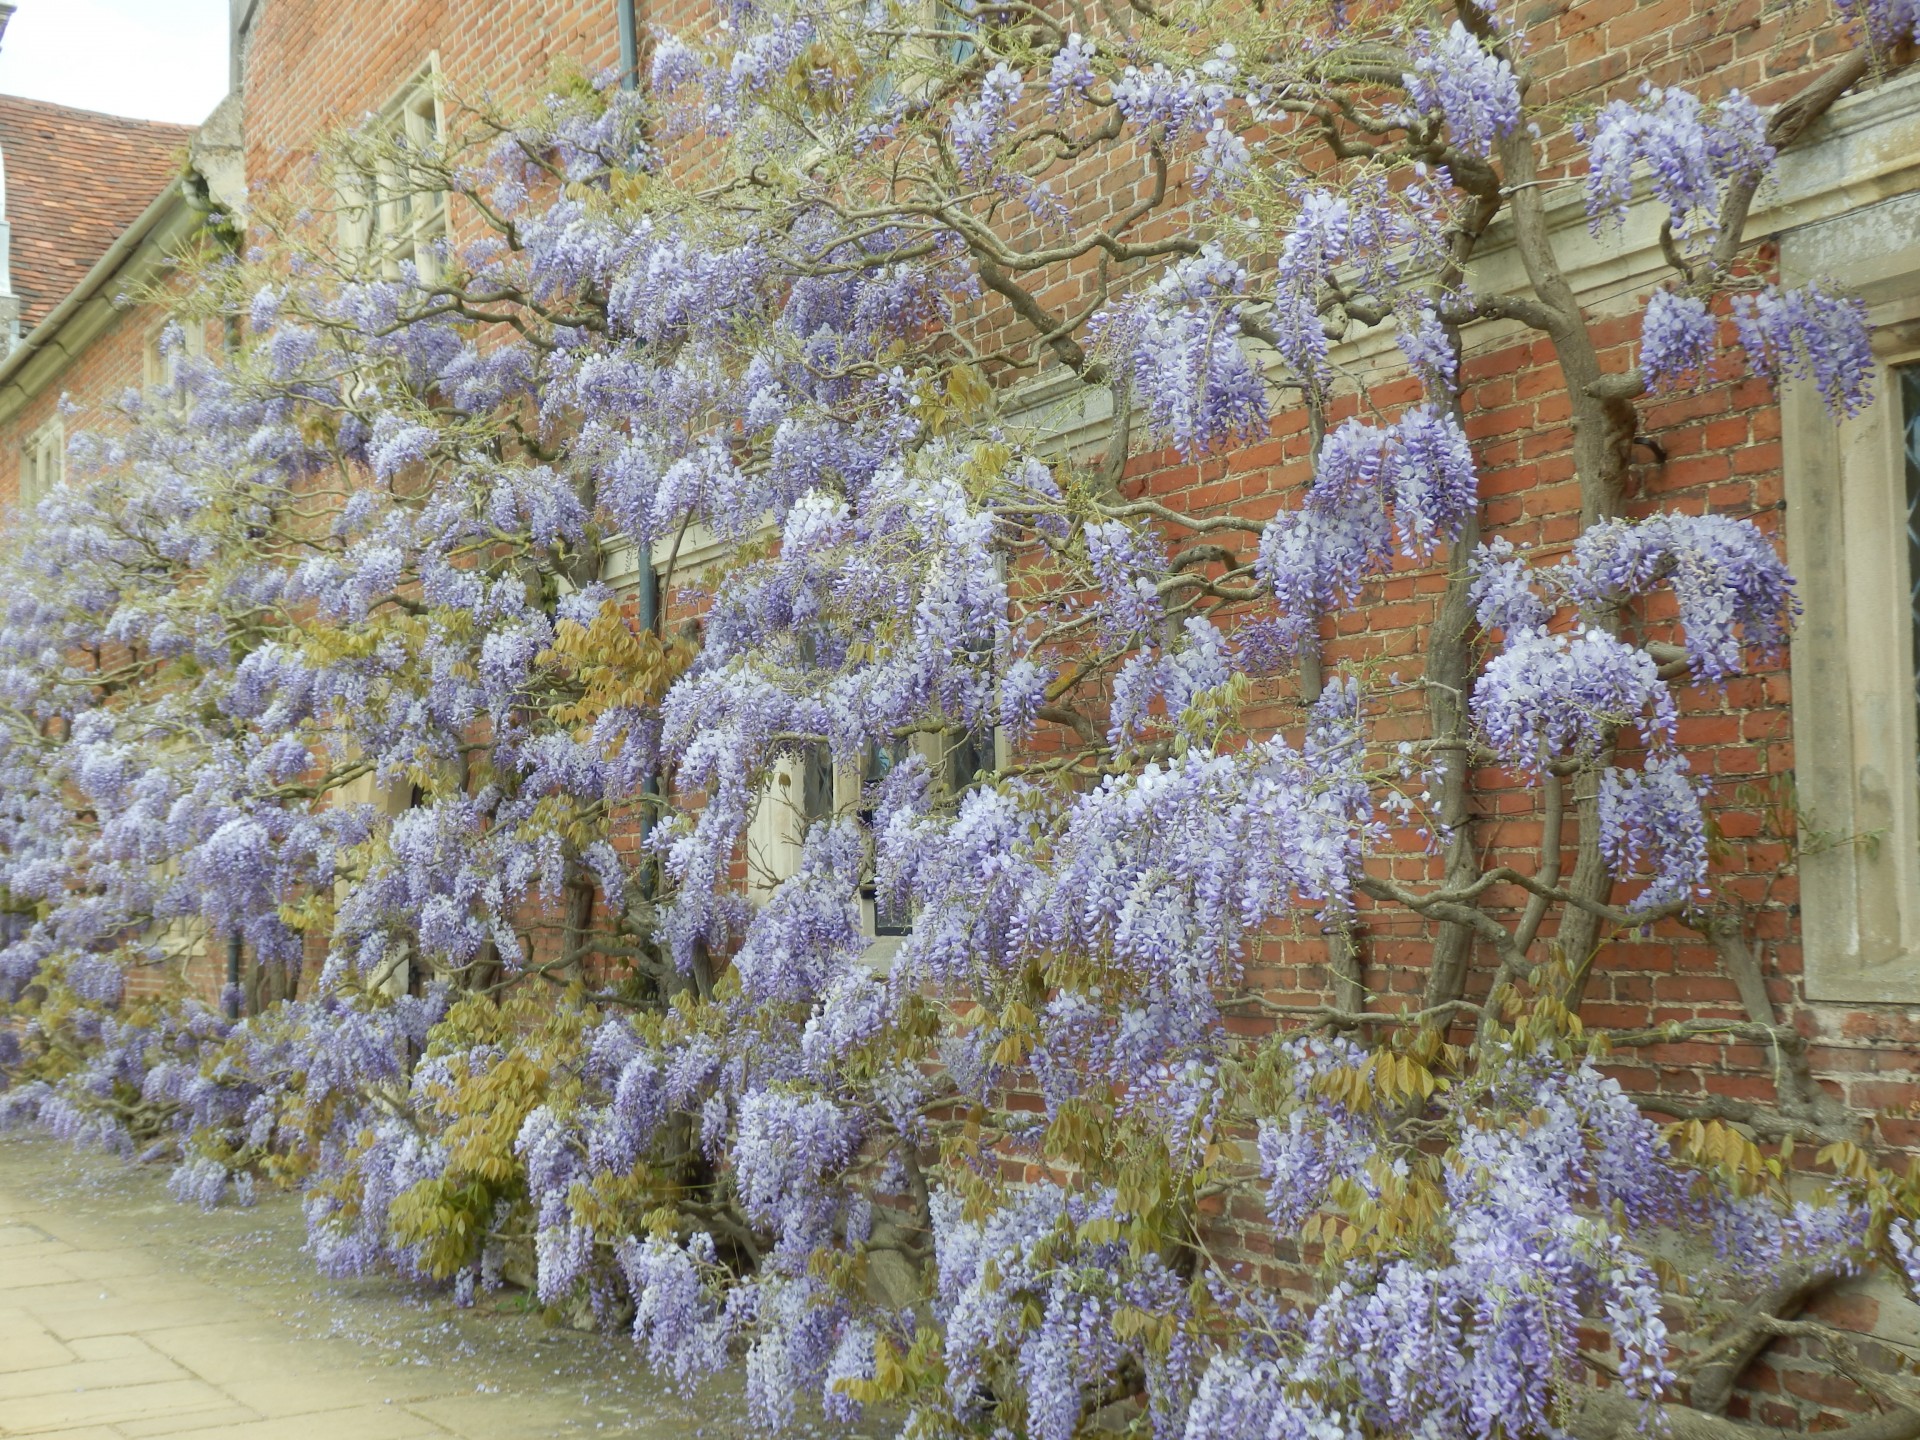 Wisteria growing over an old building in Norfolk UK